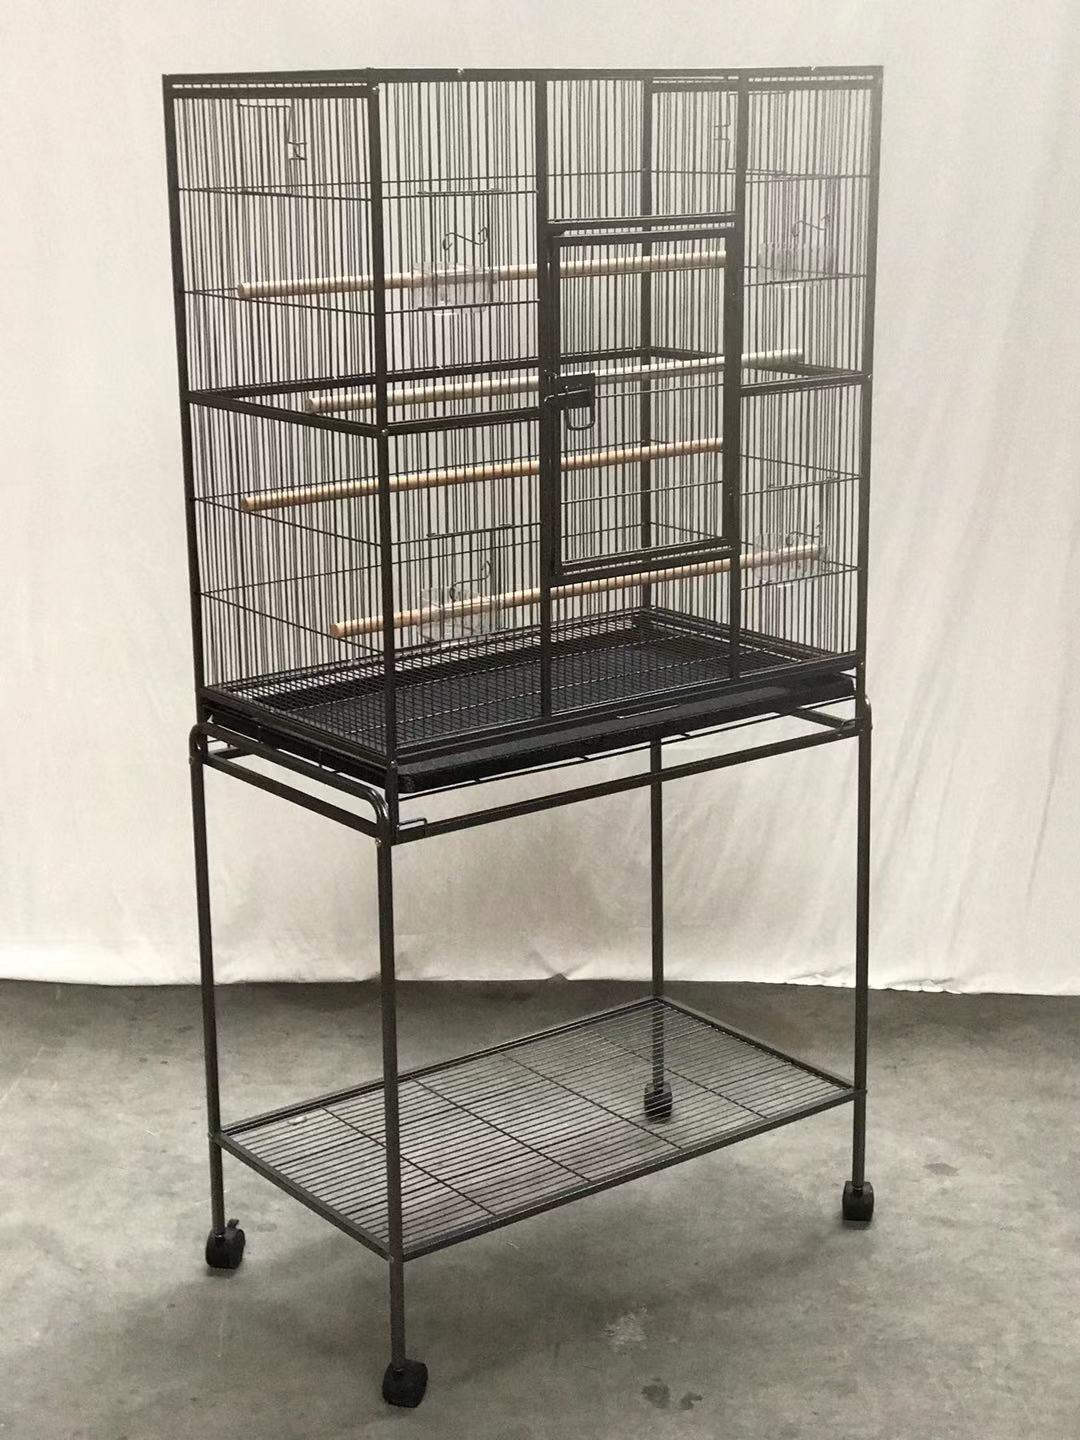 Bird Cage Parrot Aviary Pet Stand-alone Budgie Perch Castor Wheels 161cm